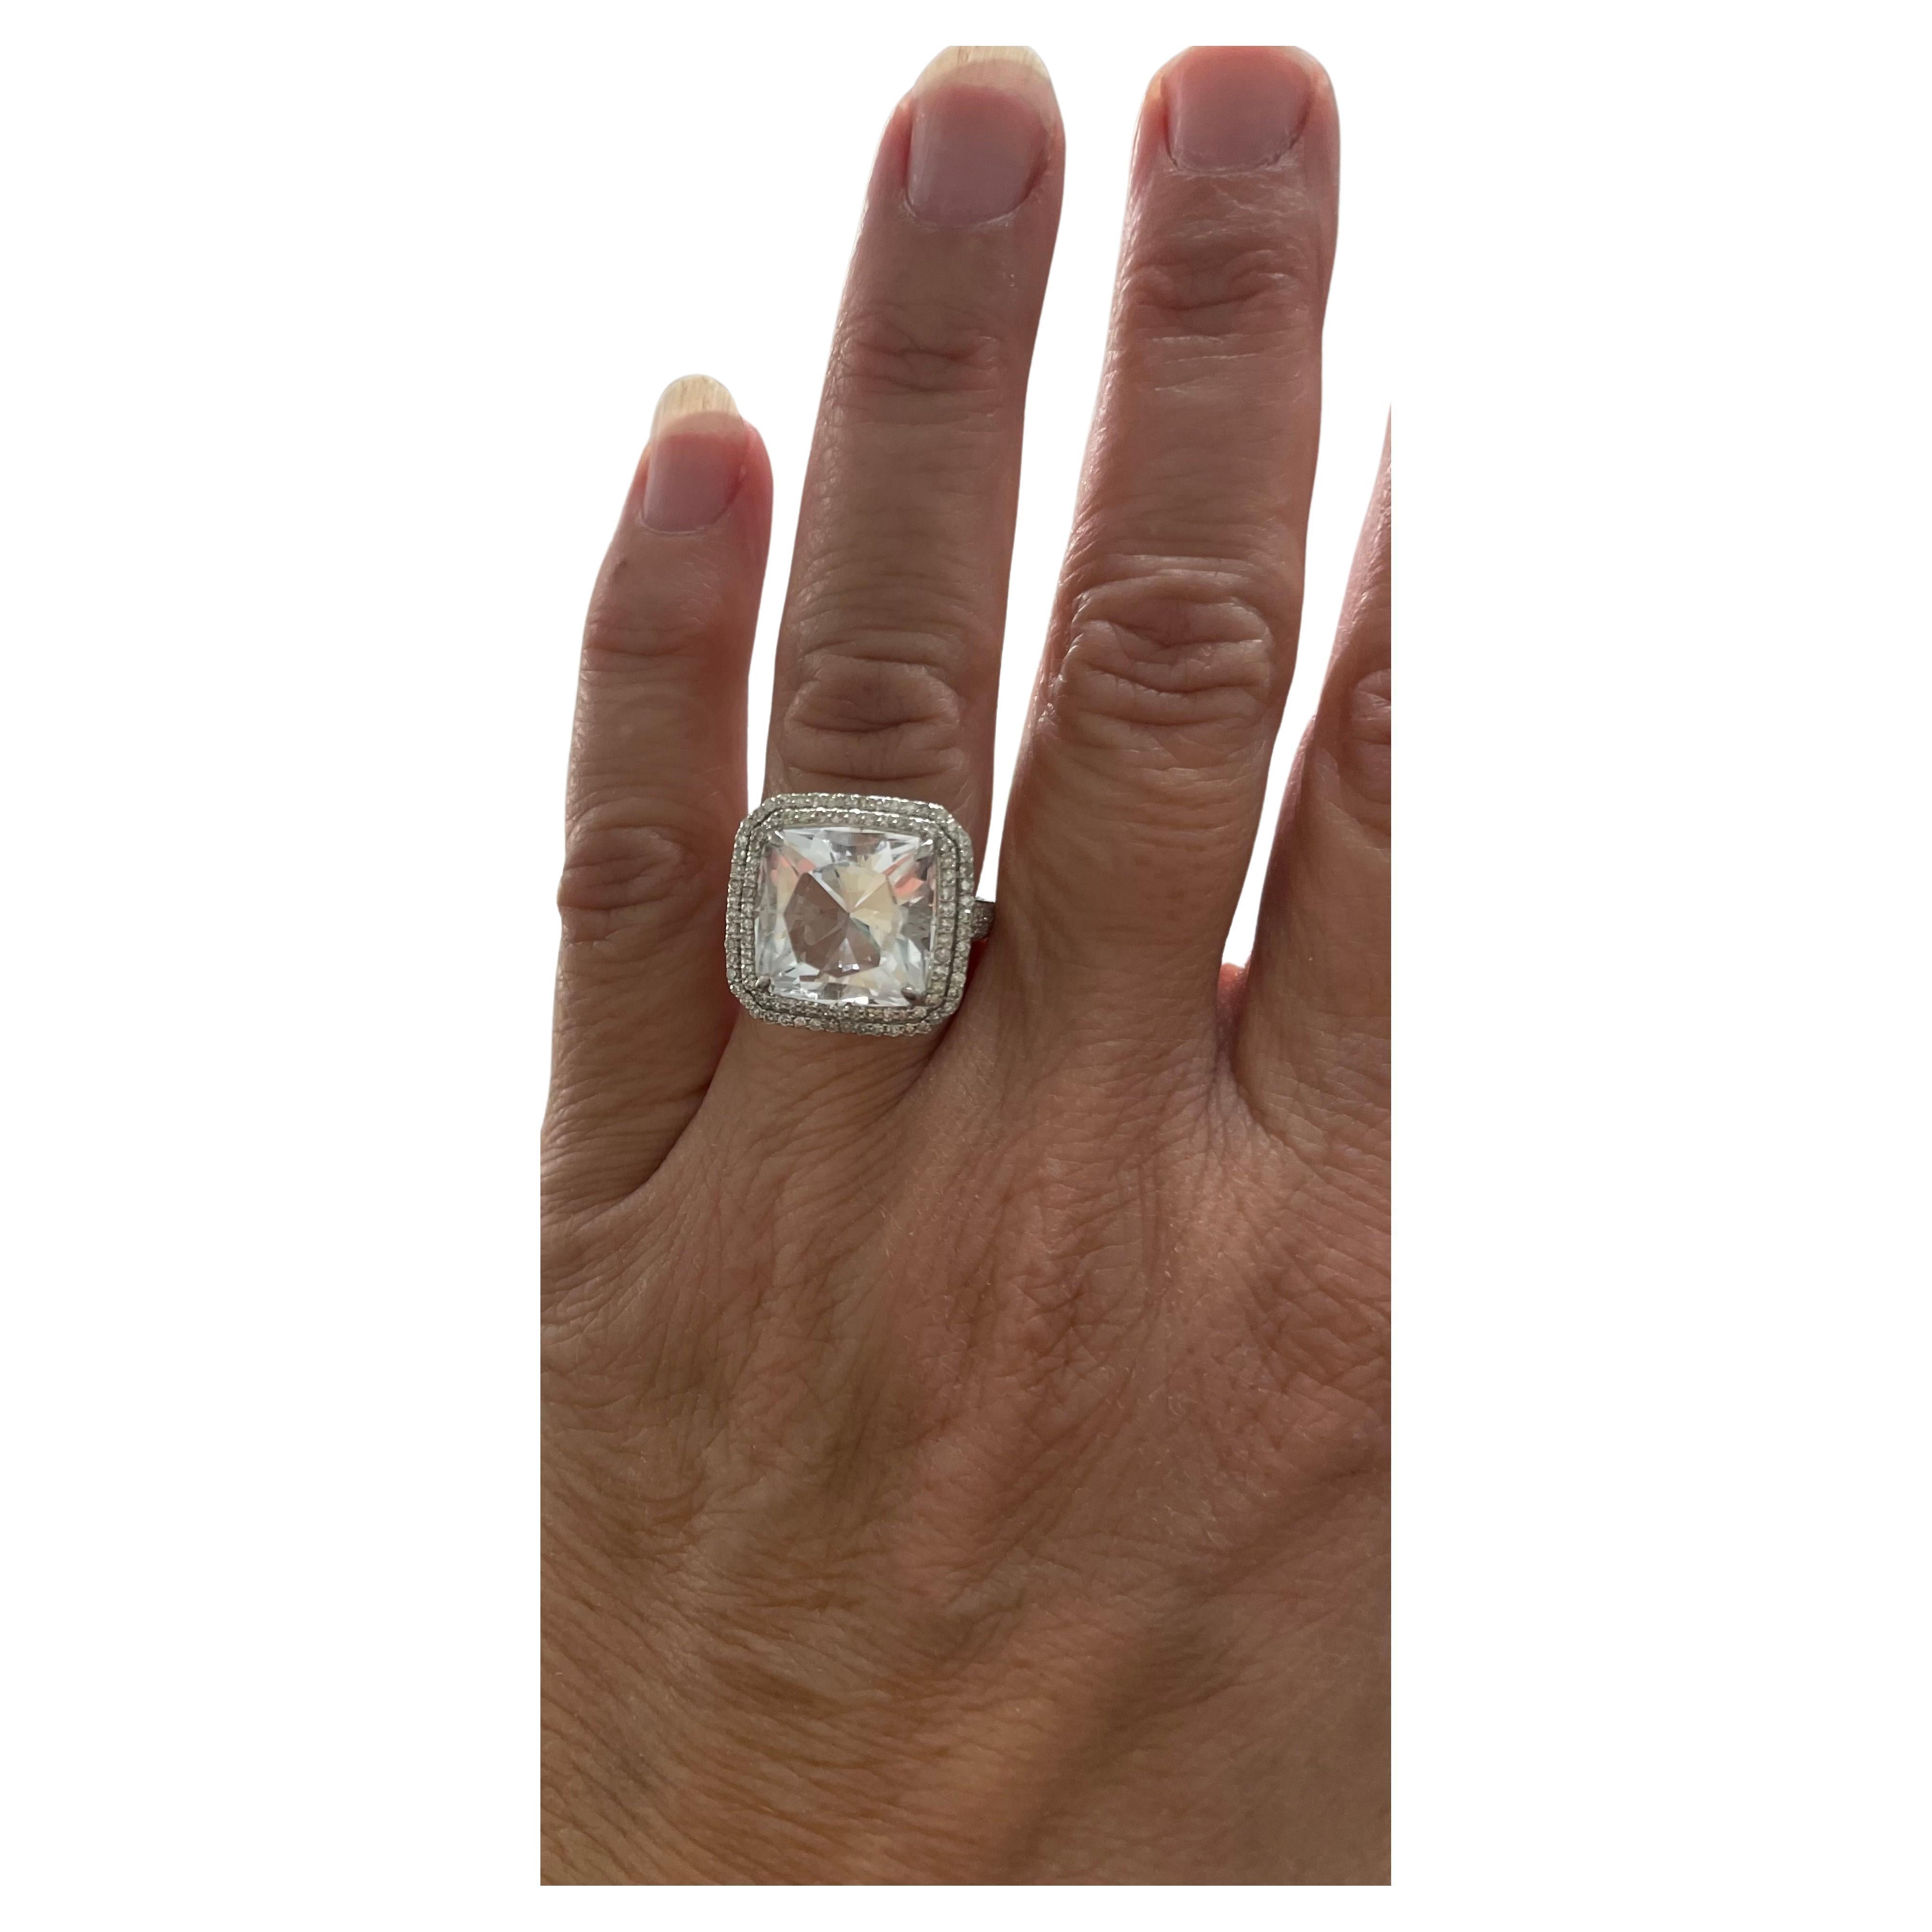 Description
Rare and desirable to collectors, this clear Petalite gemstone is framed with a double step rows of pave diamonds. The ring displays diamond quality for a fraction of the price. Item #R154

Materials and Weight
Petalite 8.9 carats, 13mm,